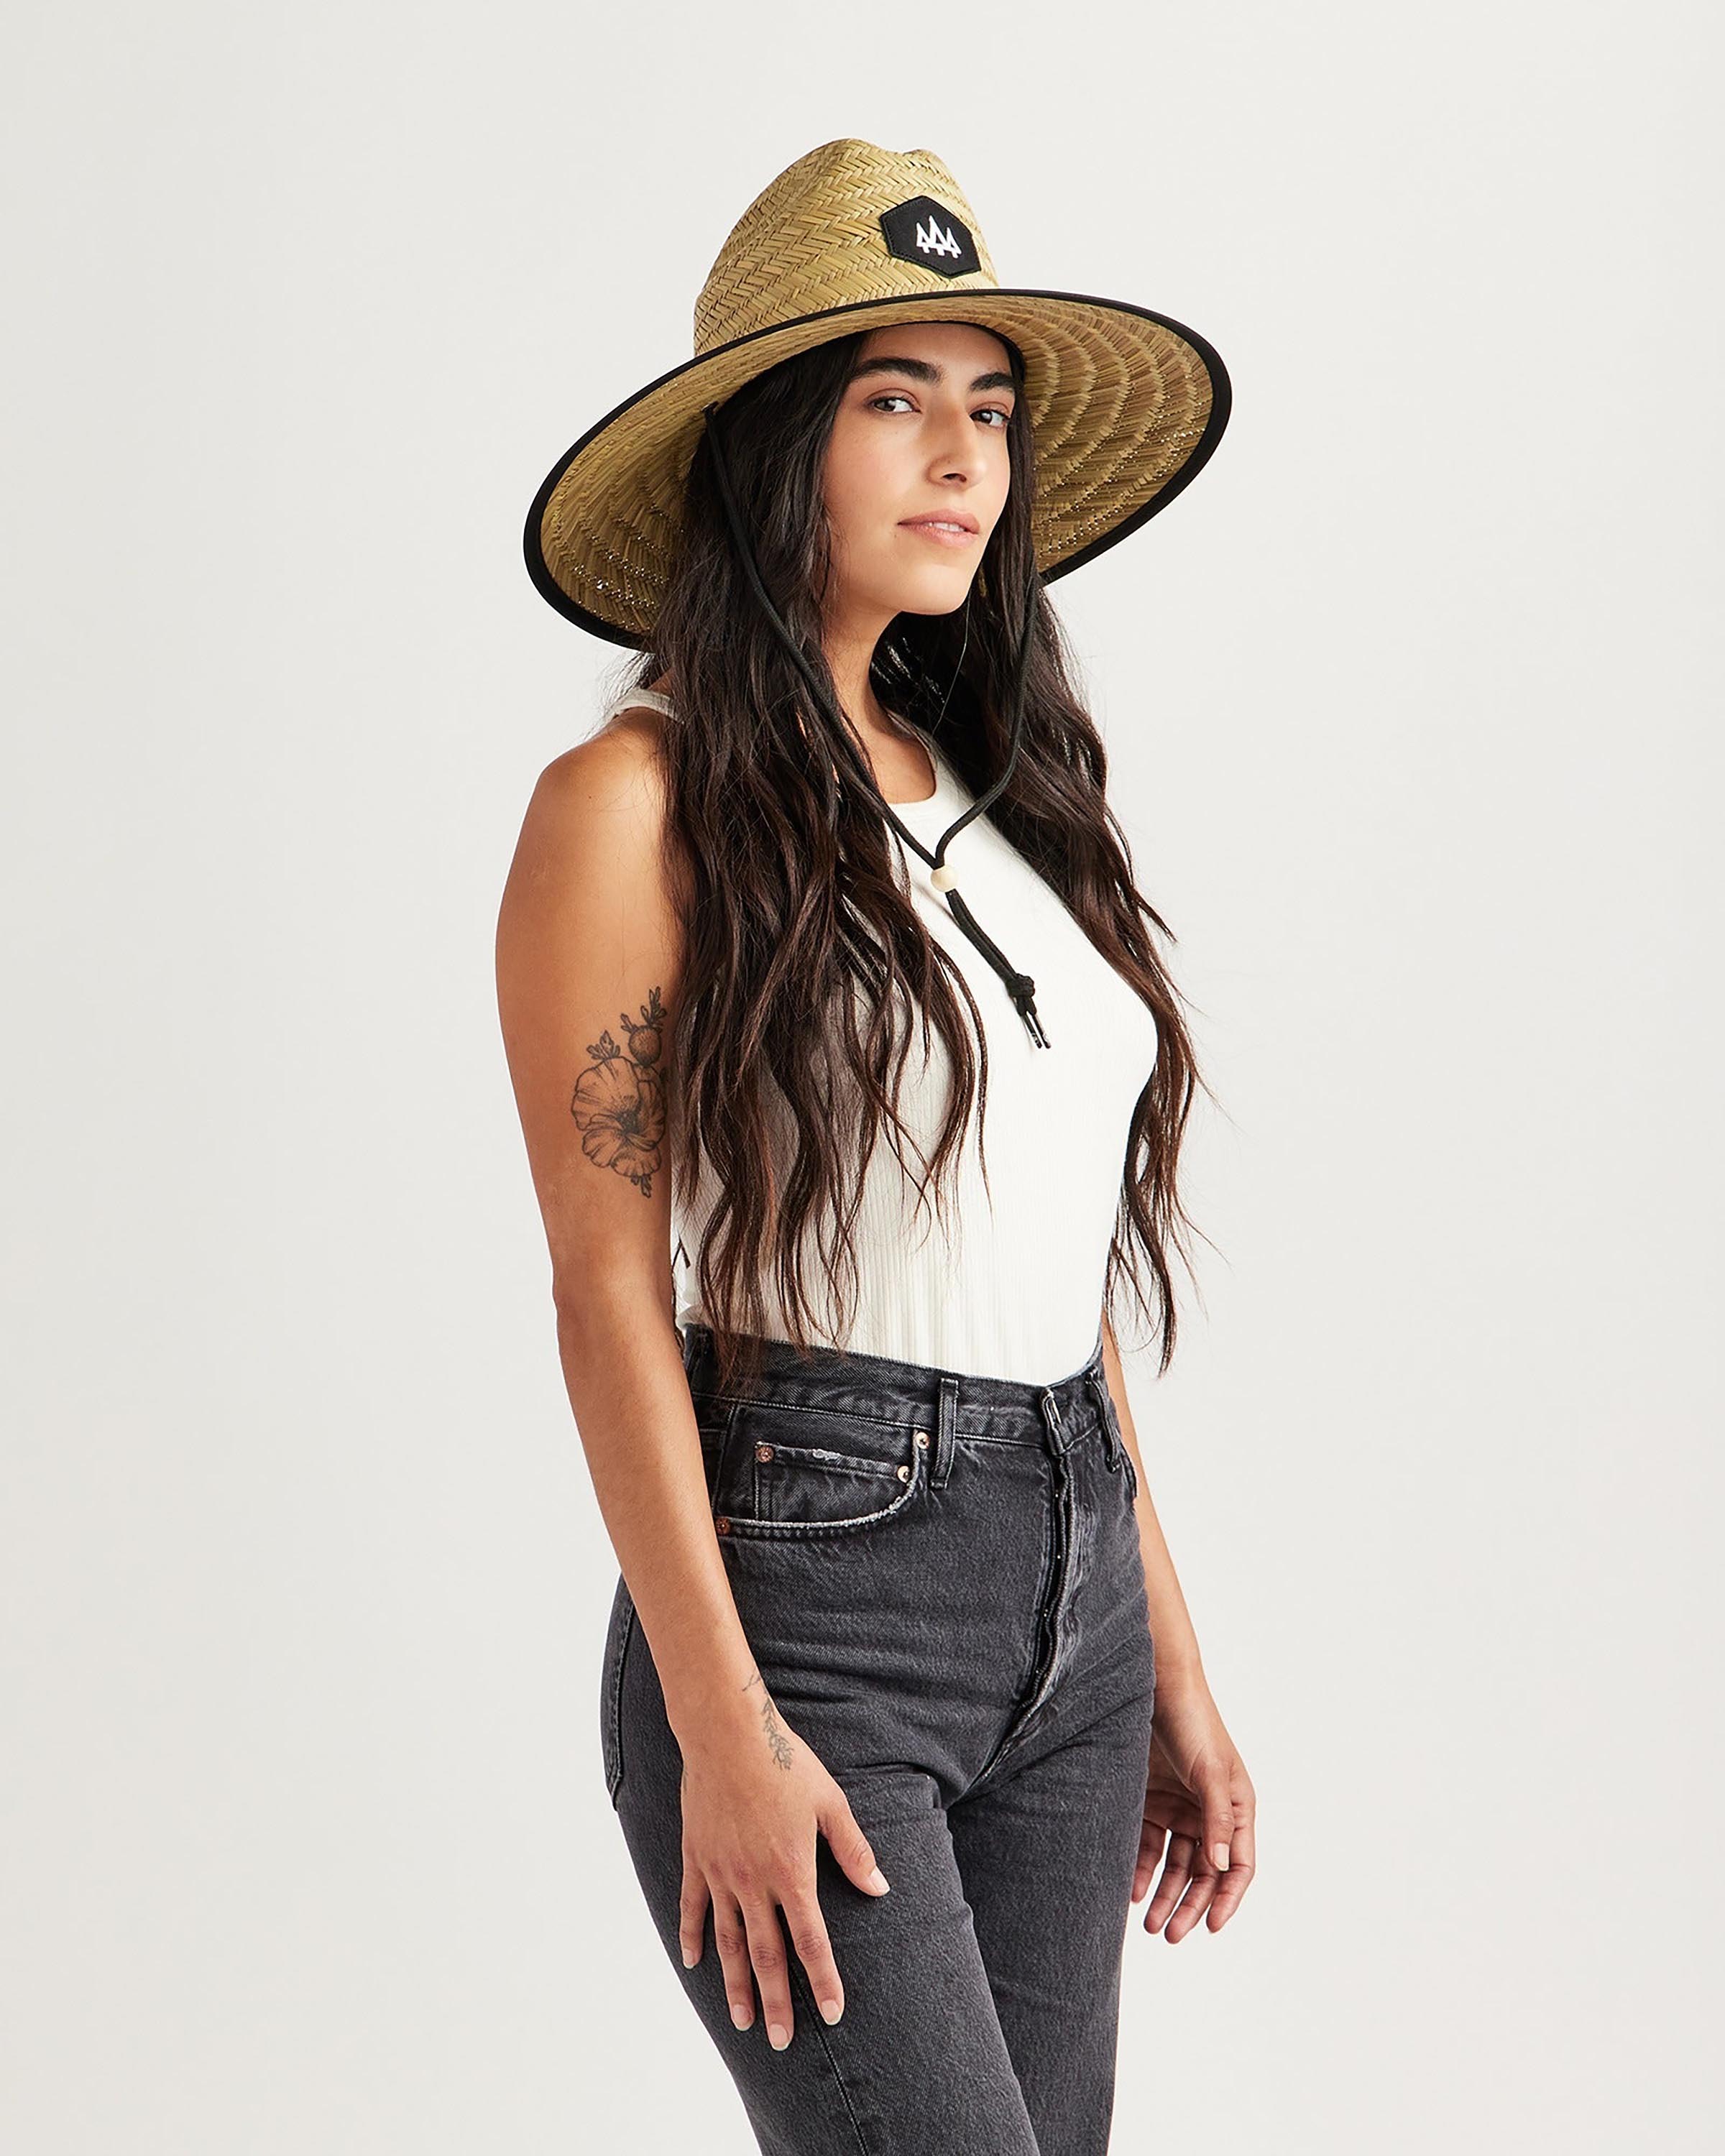 Hemlock female model looking to the side wearing Midnight straw lifeguard hat with black color